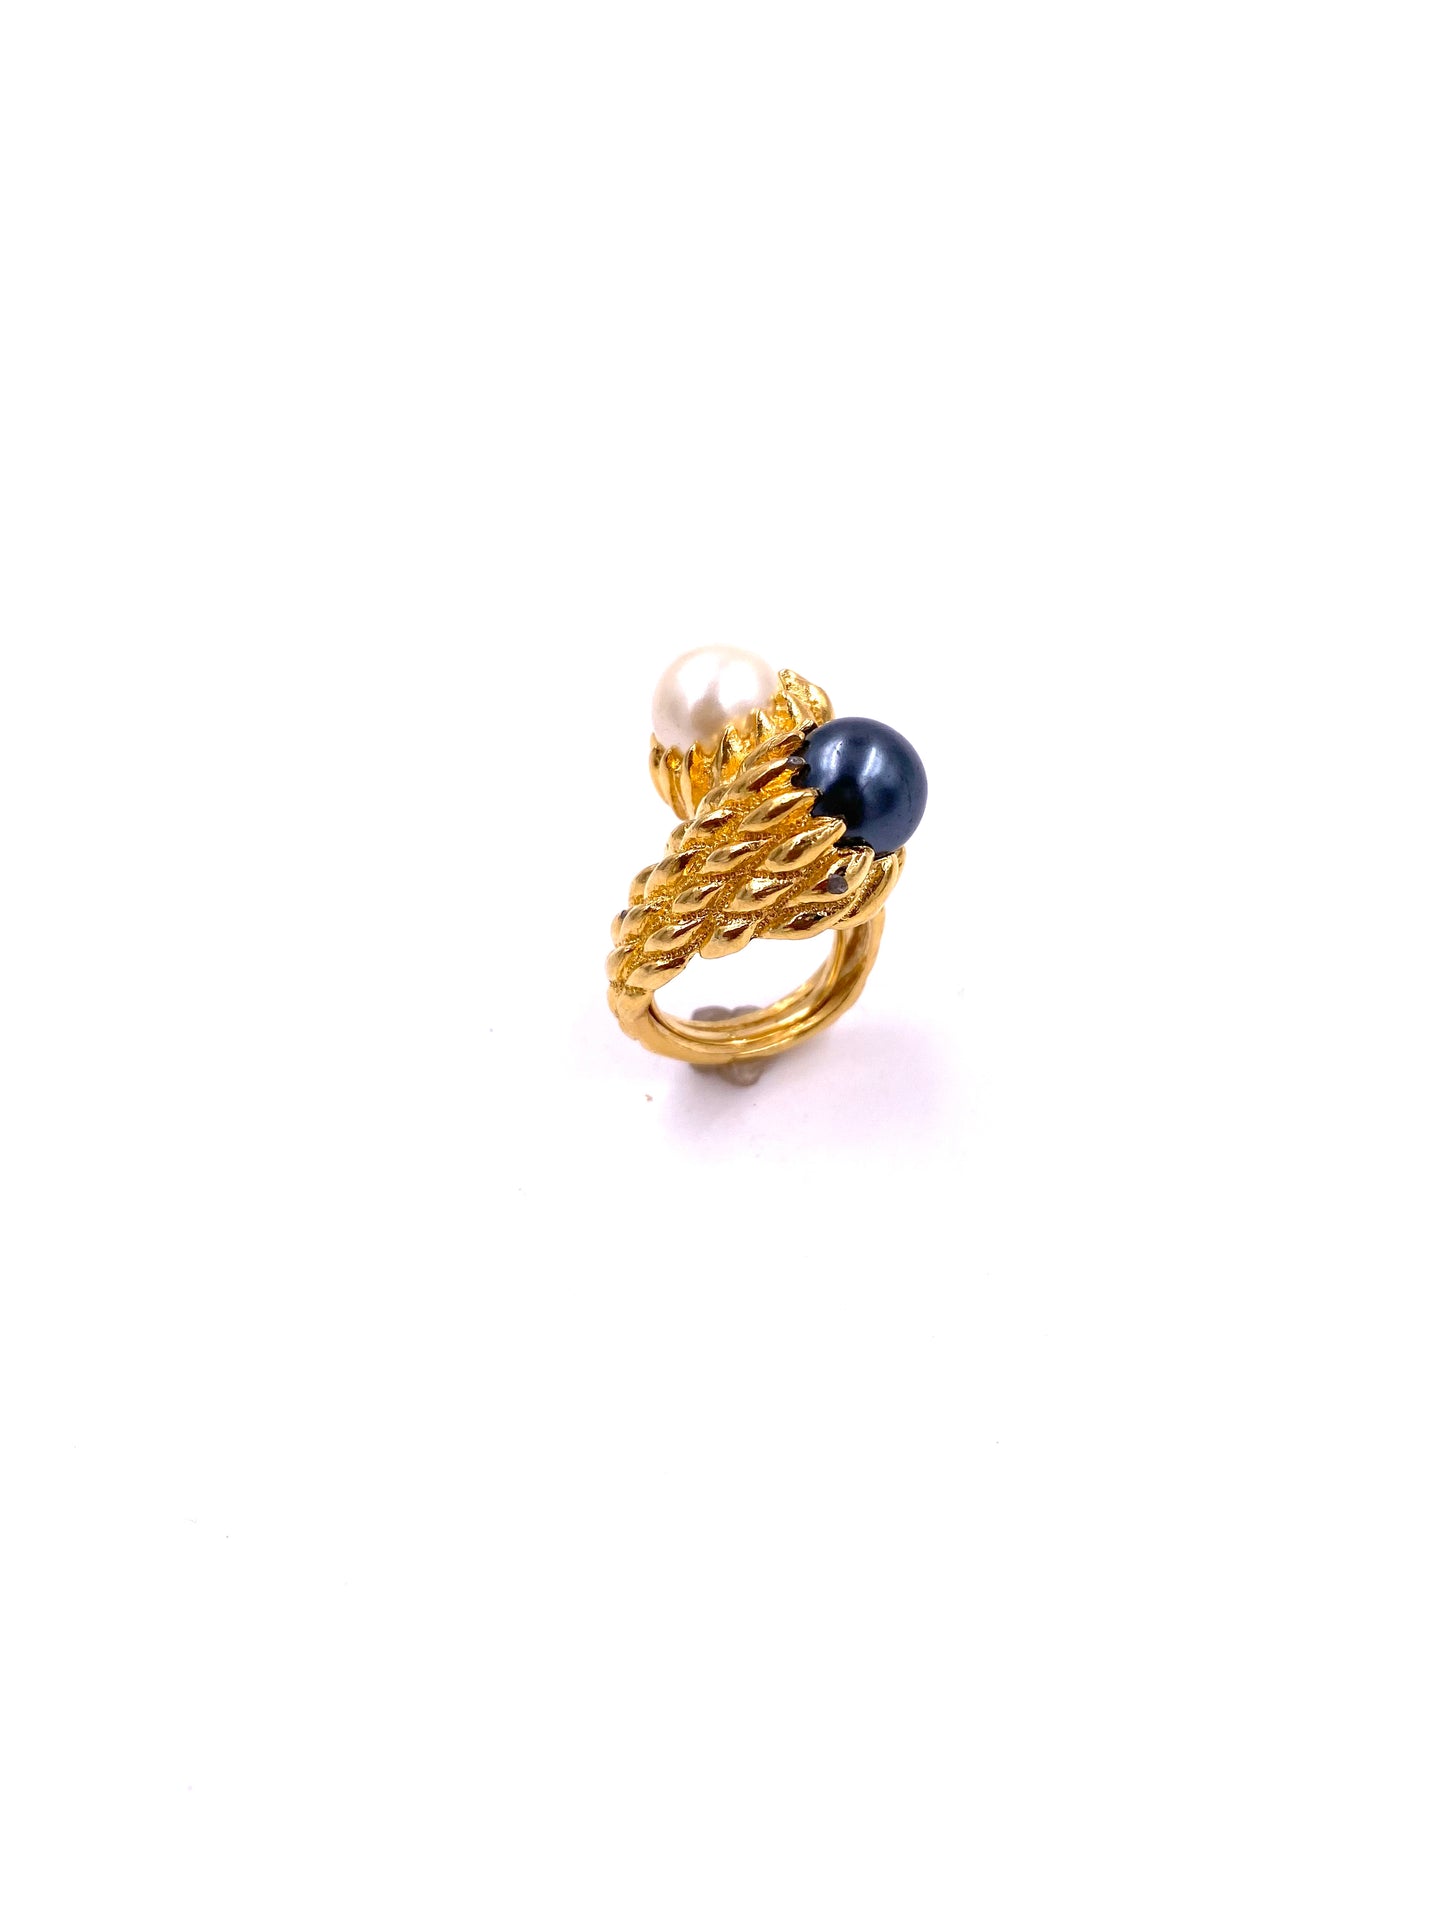 Trifari Gold Textured Two-Toned Pearl Cocktail Ring